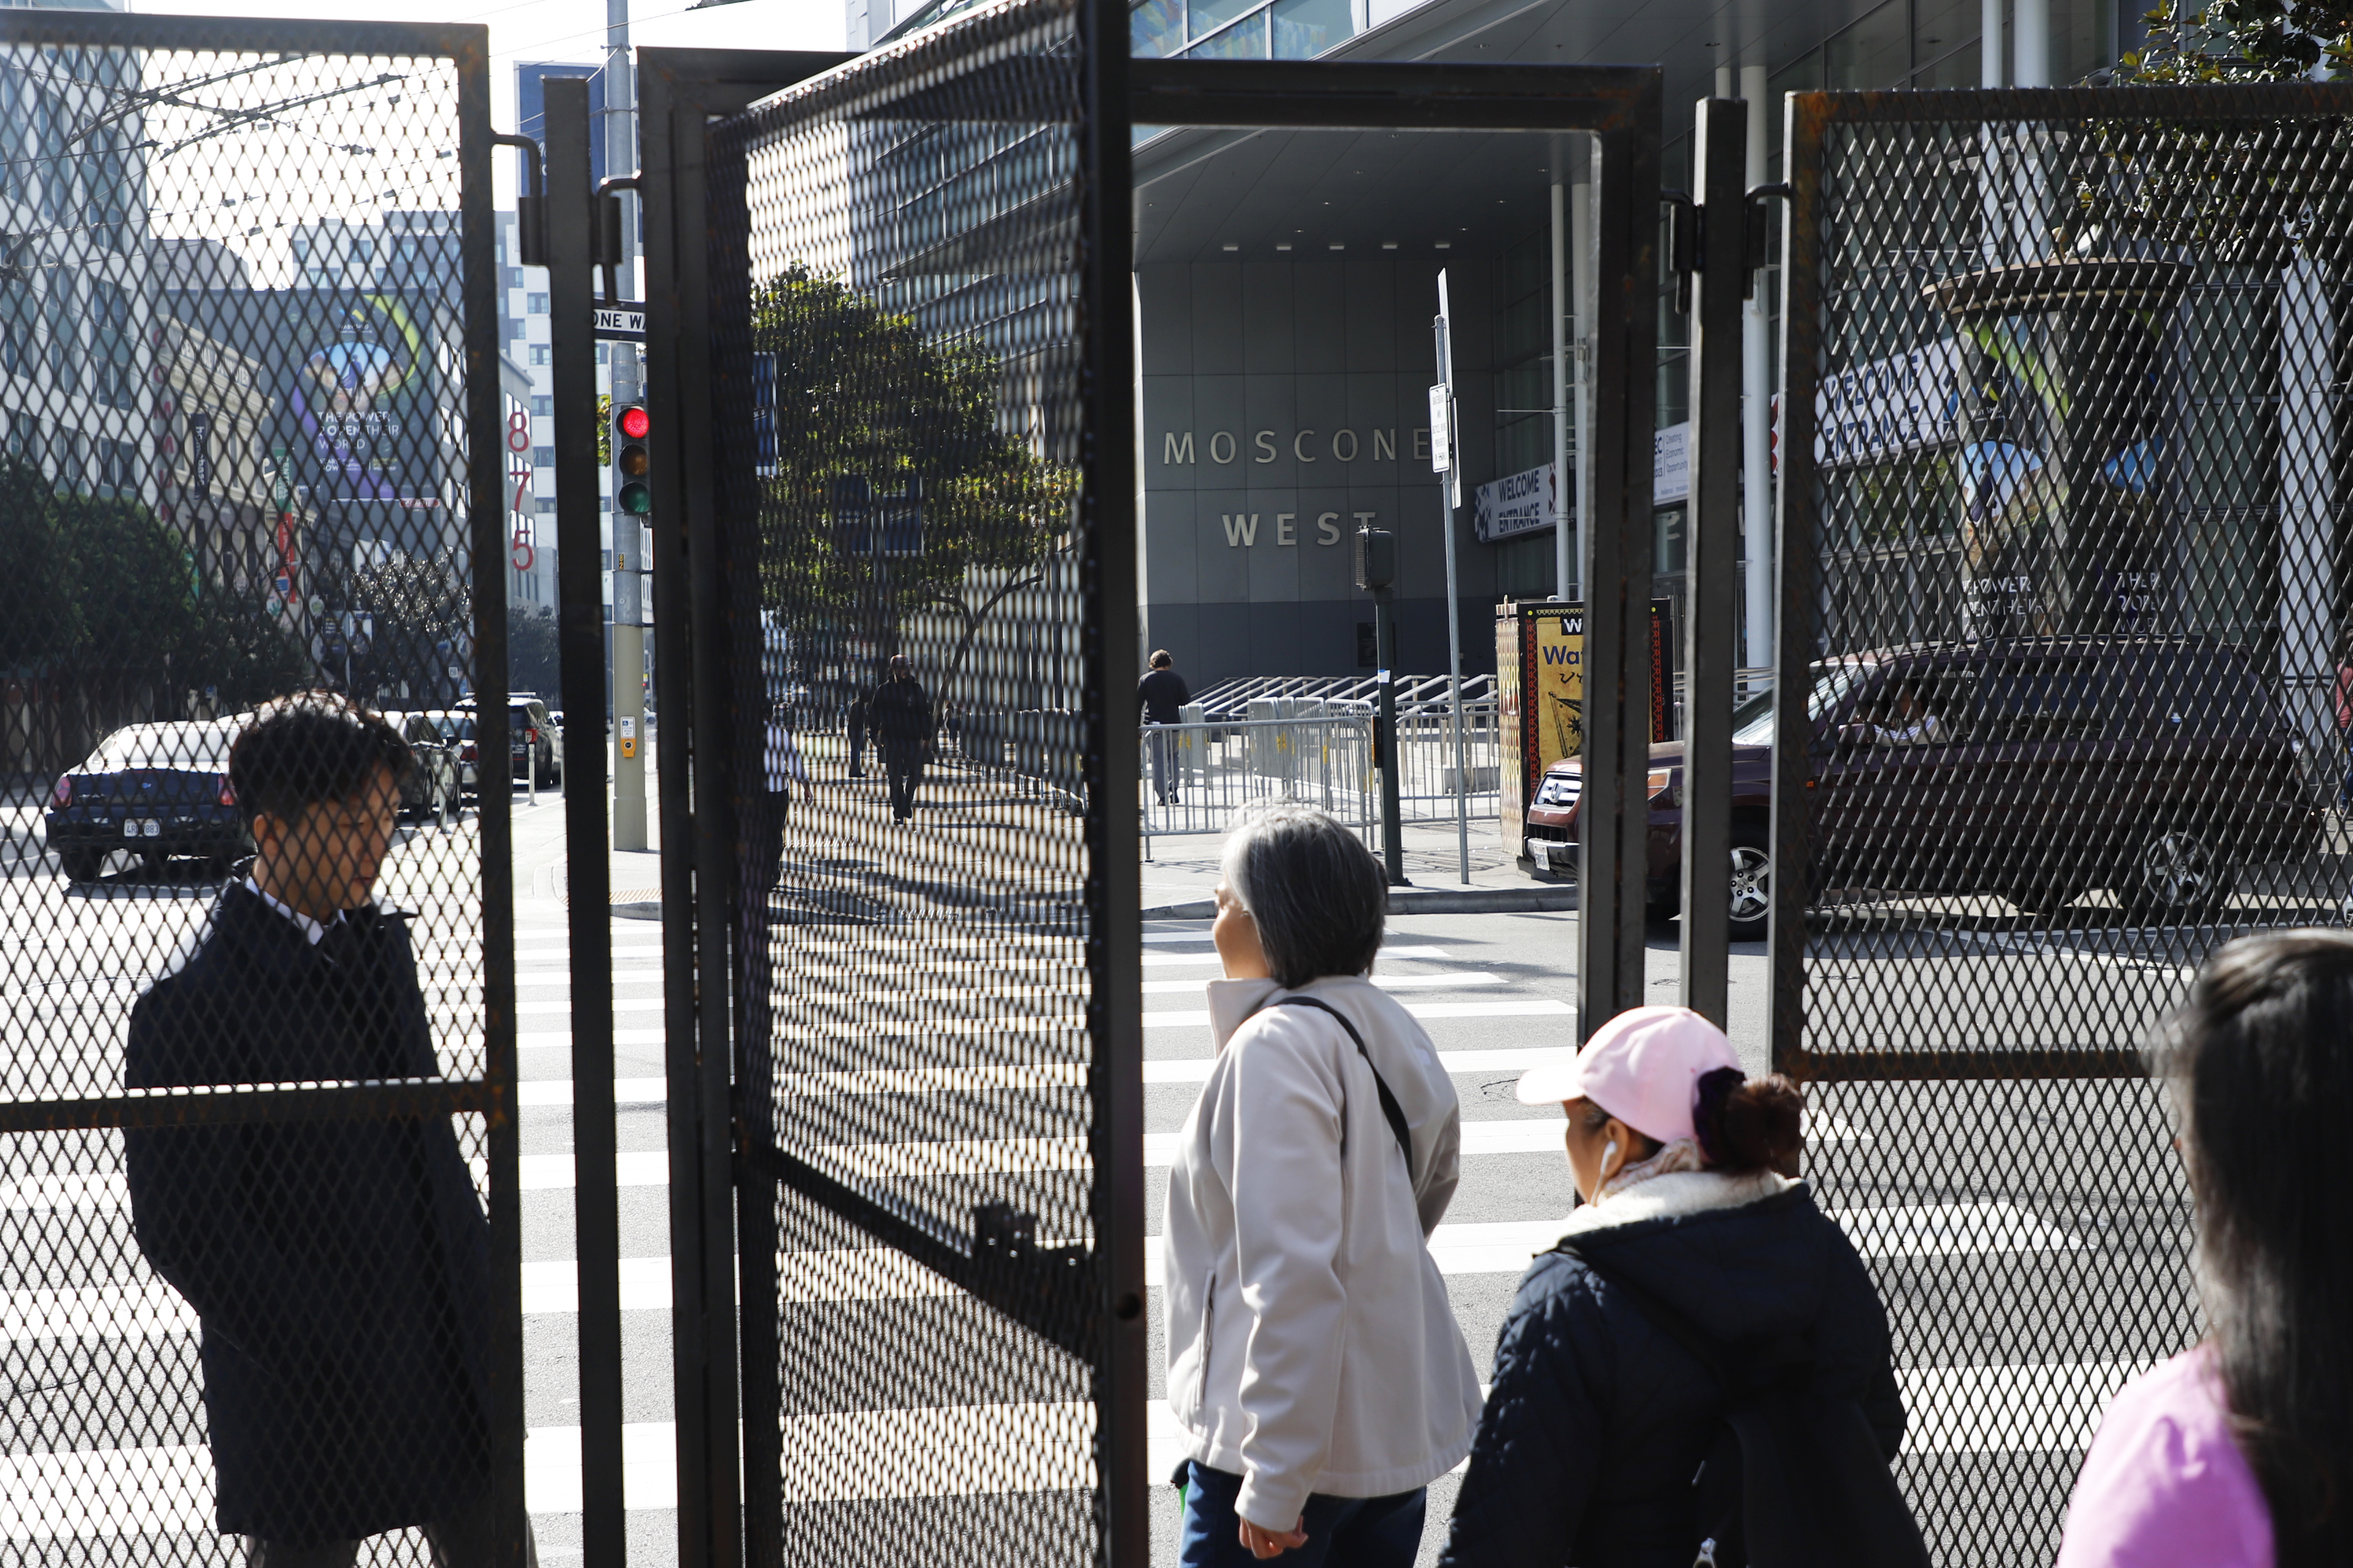 A person walks through a tall black metal fence with an open gate are on a city street corner with a building that reads "Moscone West" in the background.